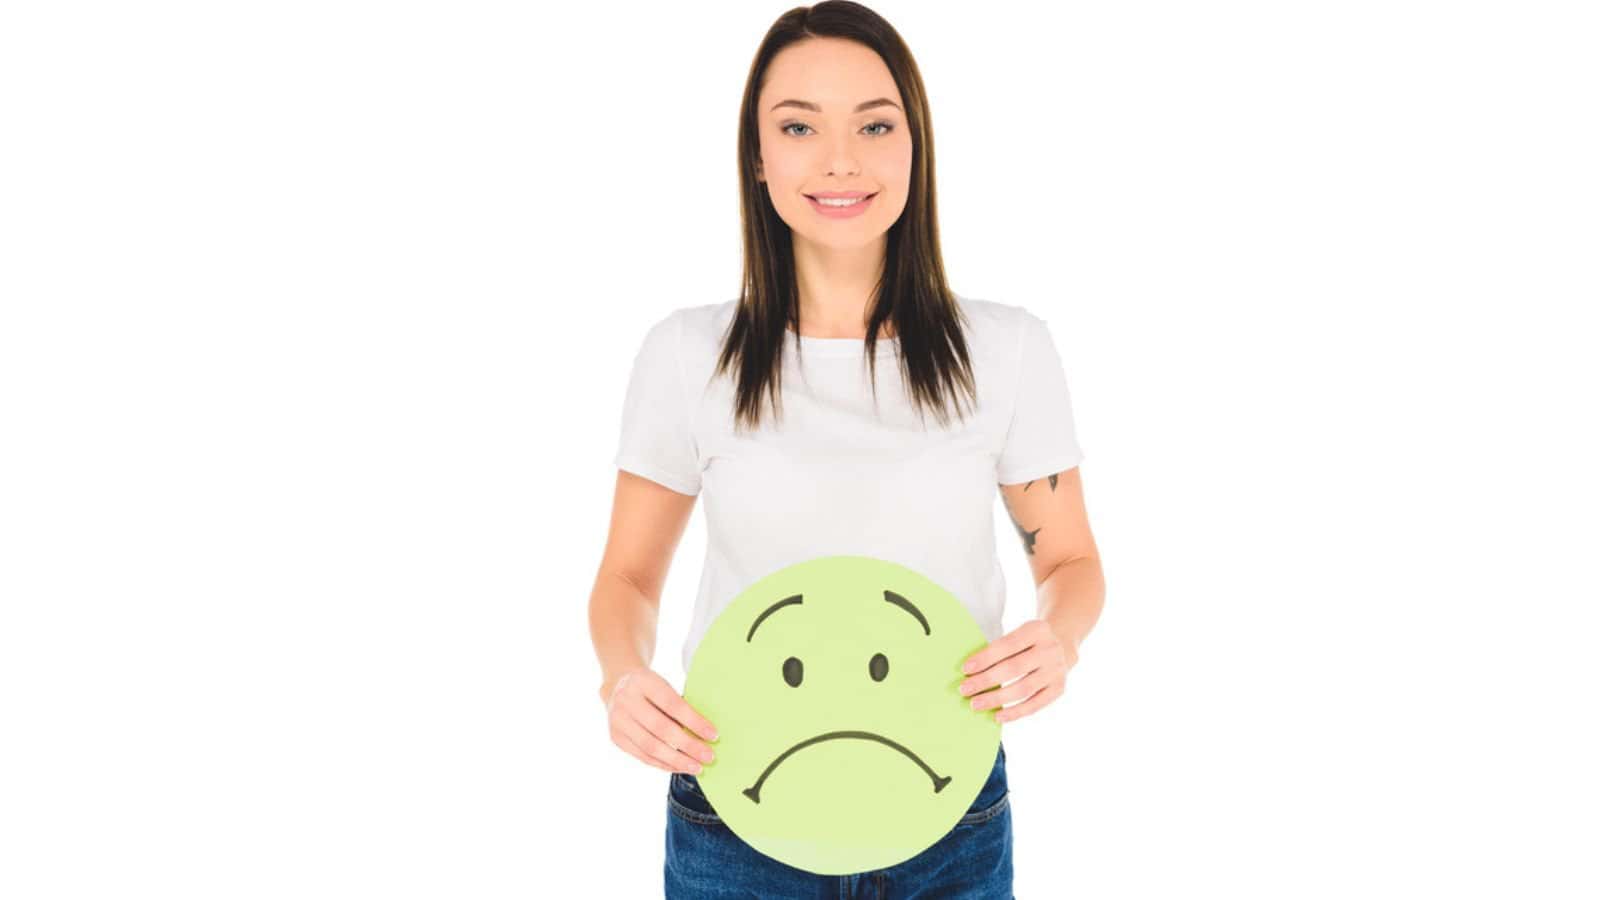 Attractive girl holding green sign with sad face expression